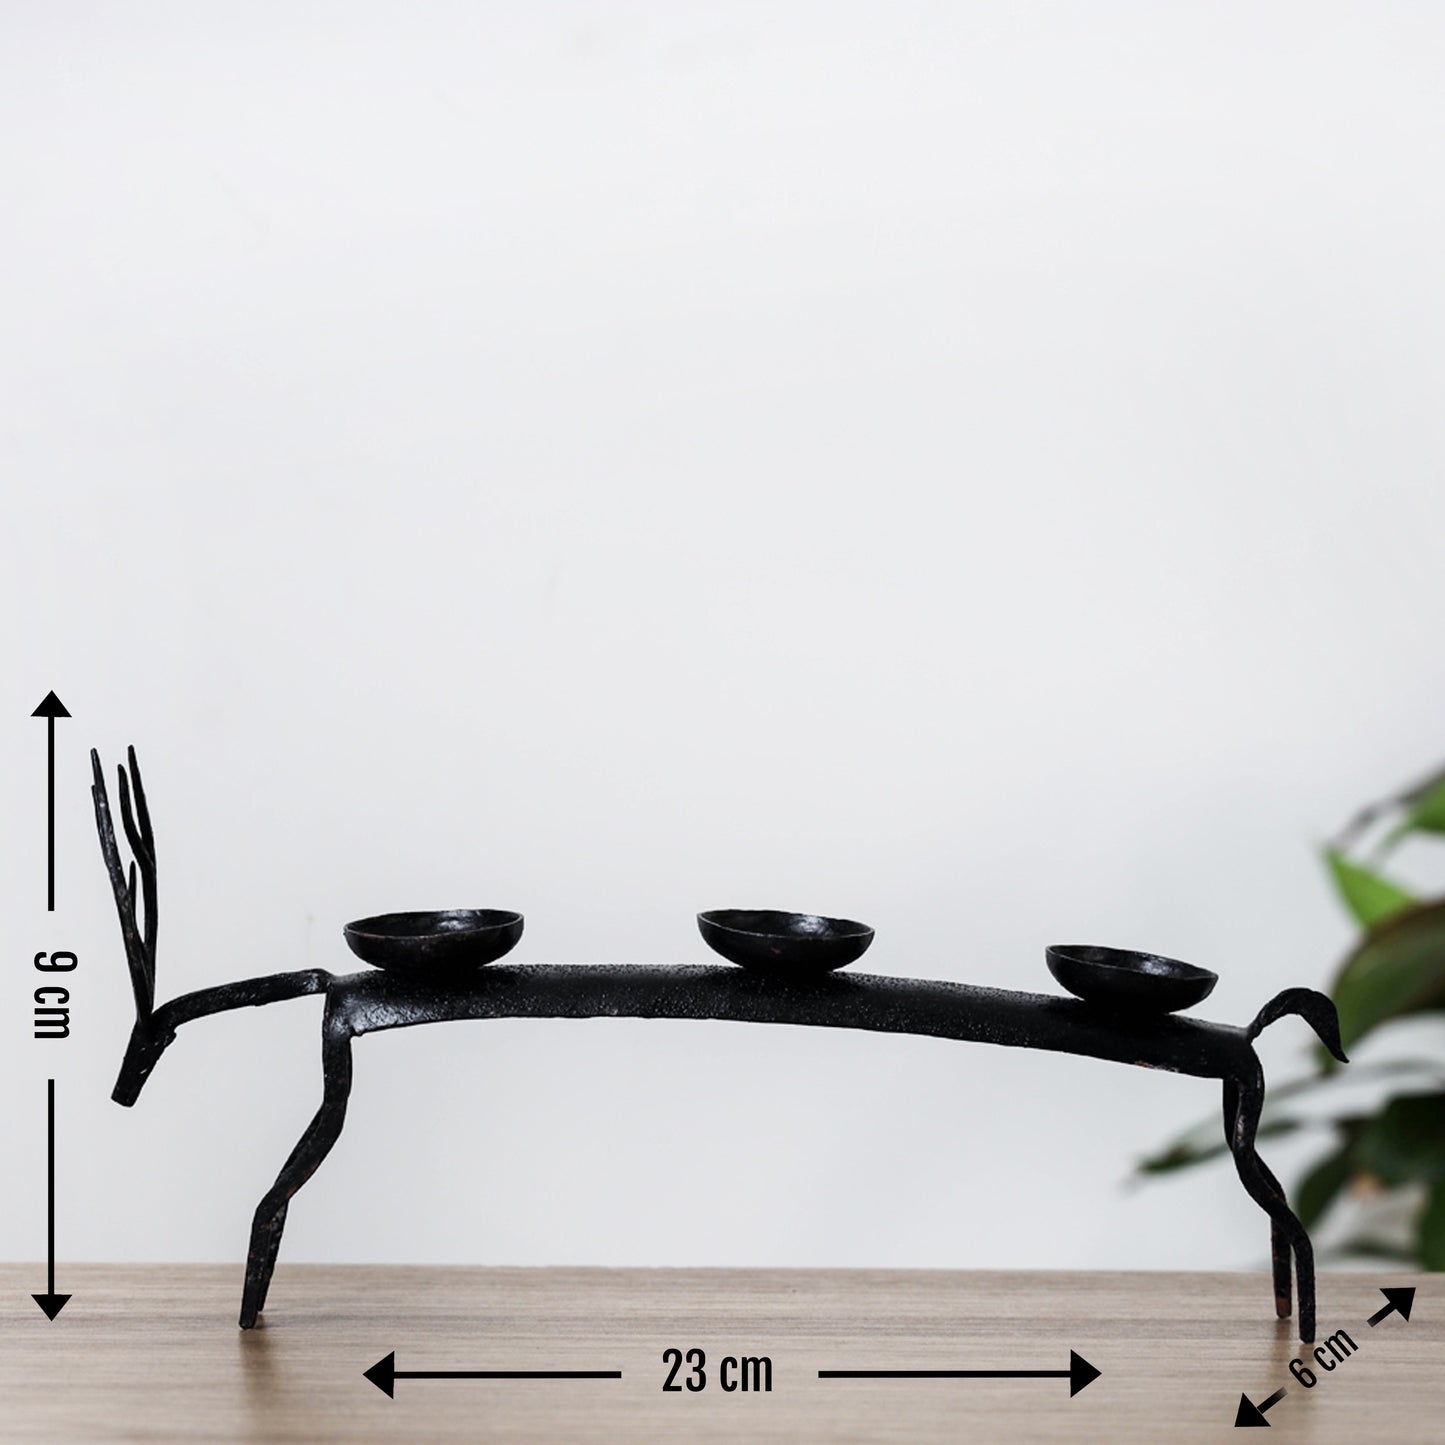 Iron Candle Stand
